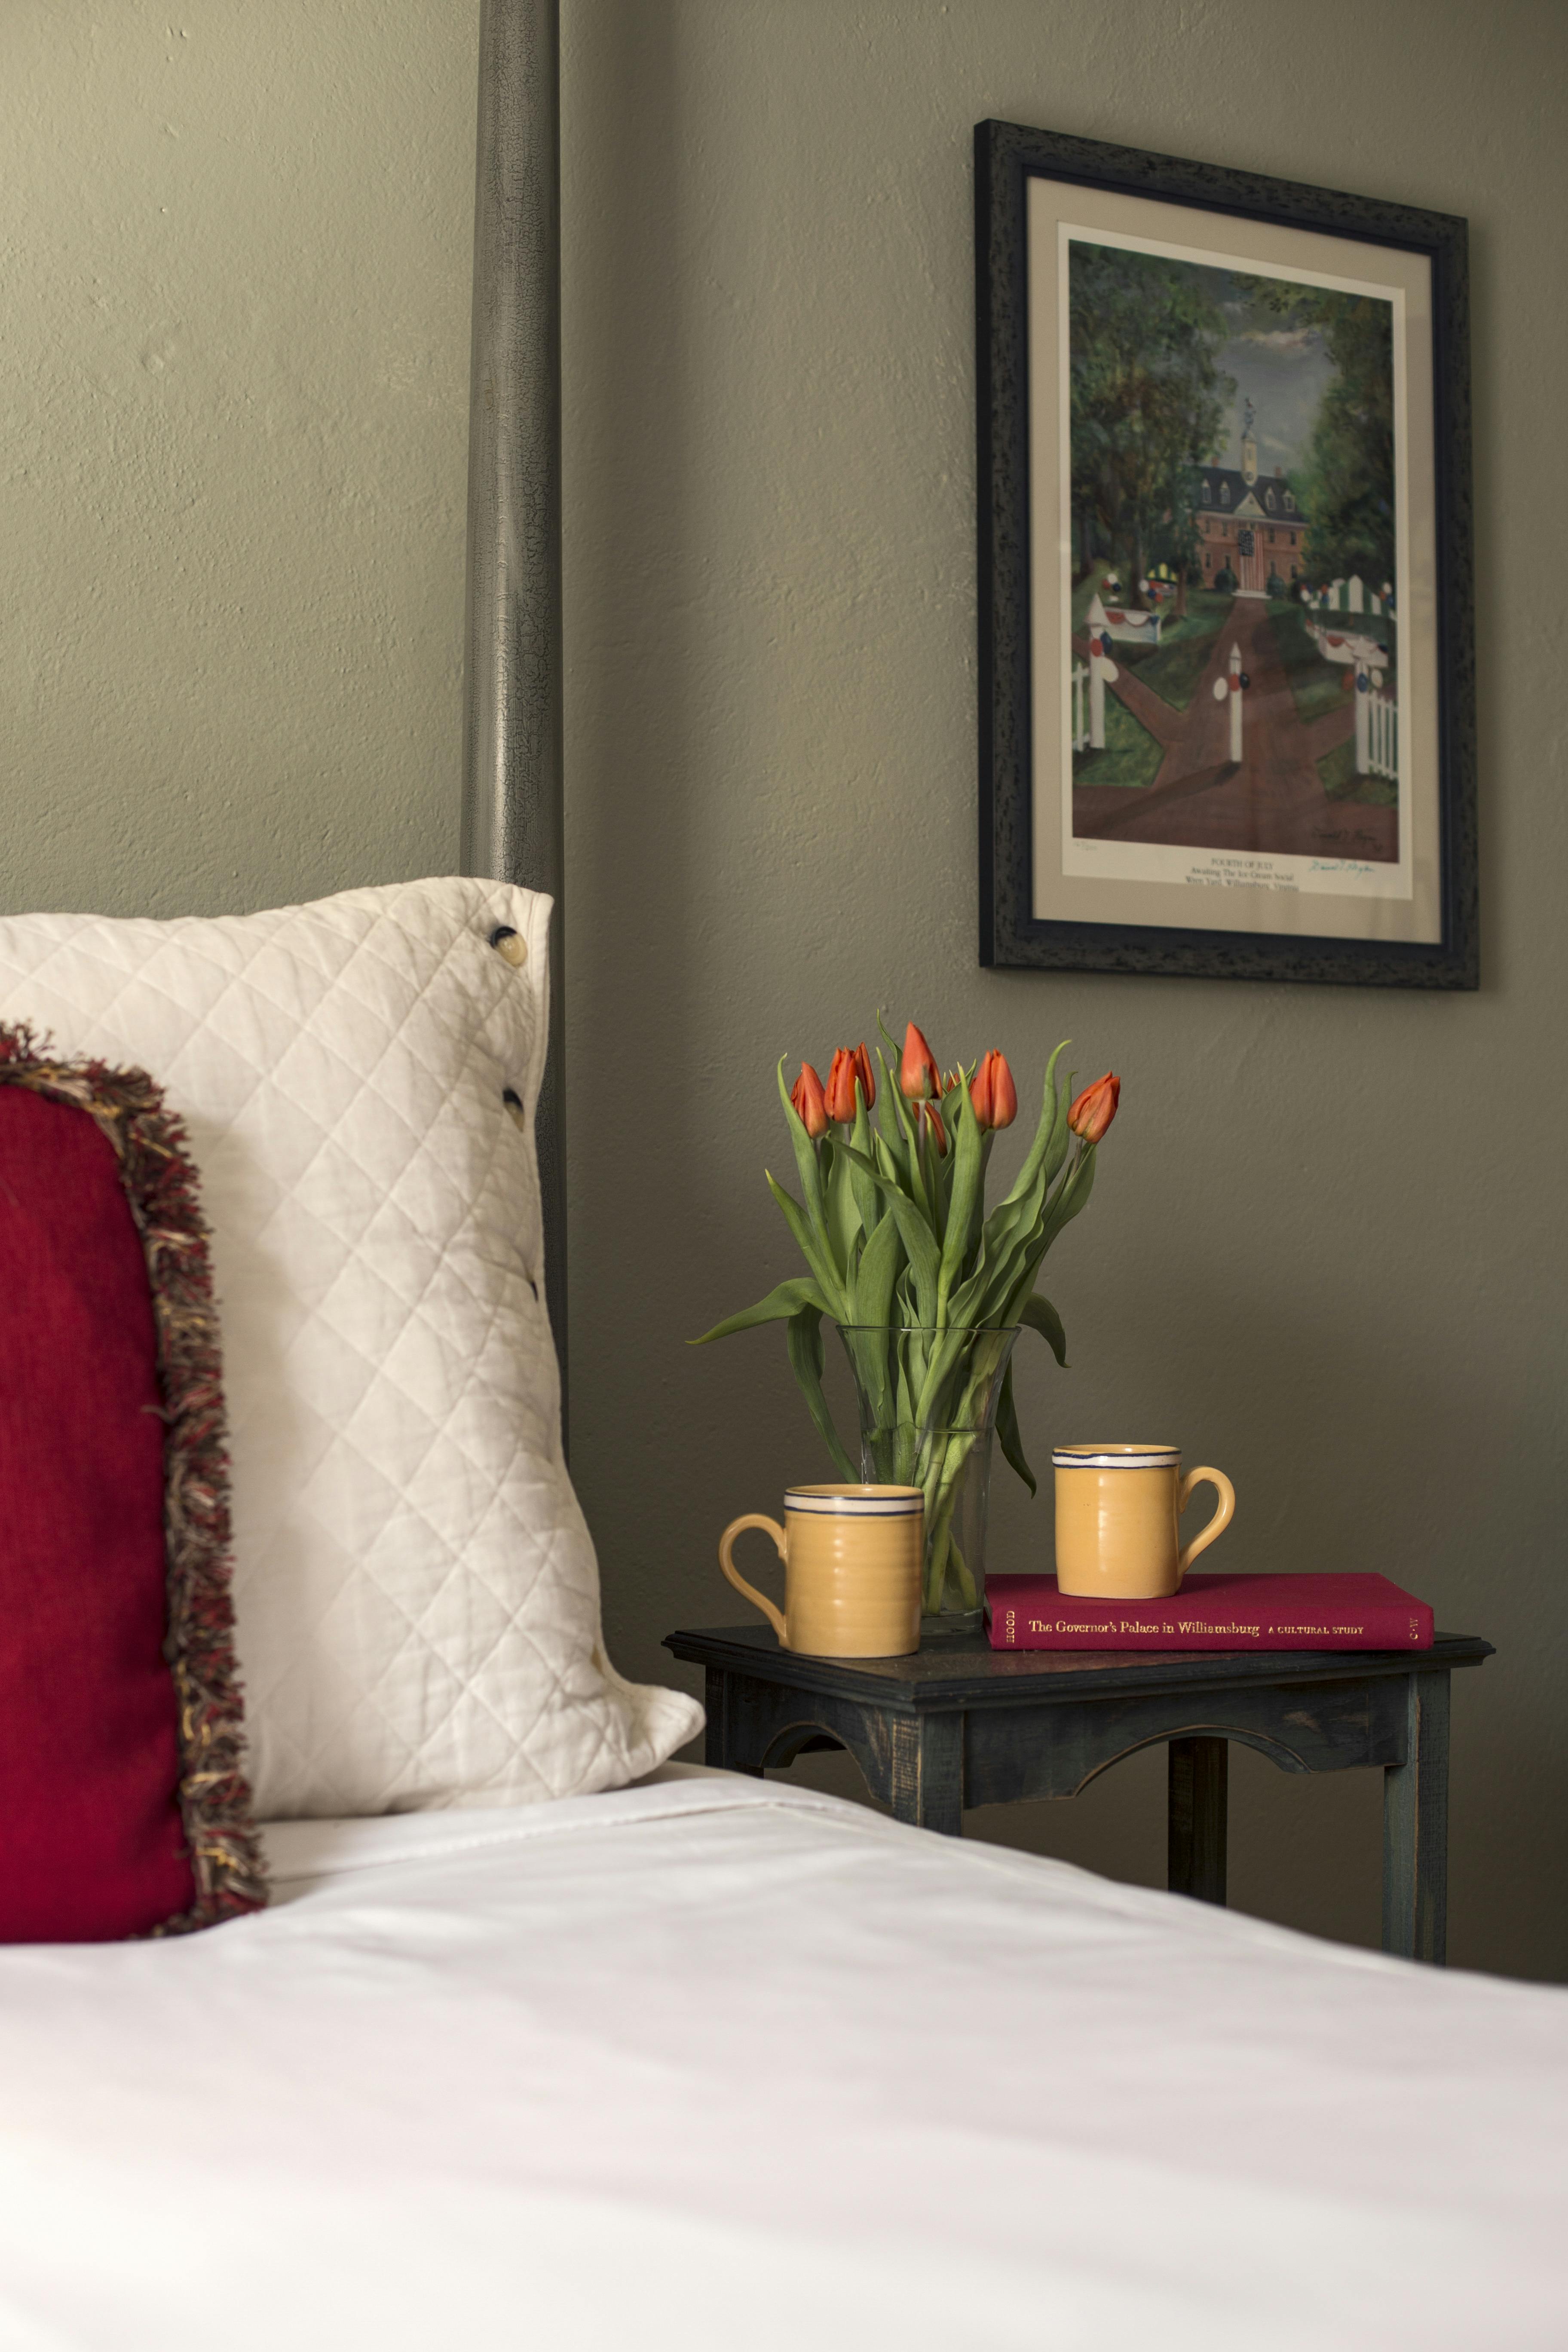 Small bedside table with two yellow mugs, a book, and vase with tulips, painting of William & Mary campus on wall